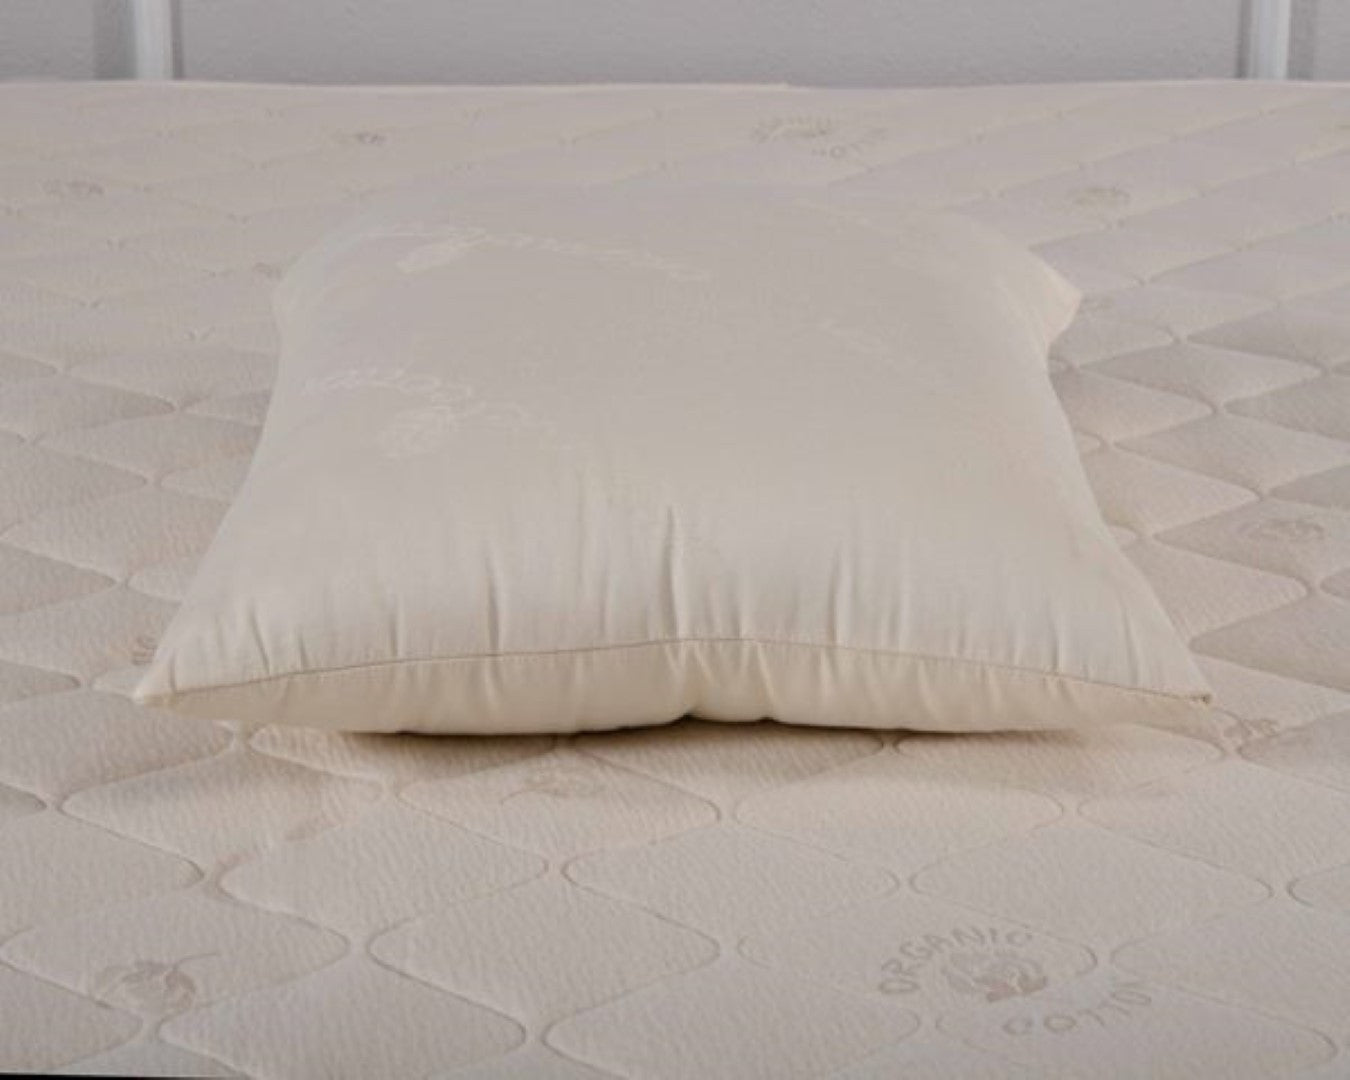 White Lotus Home Natural Shredded Latex Decorative Pillow Inserts  (Washable) at